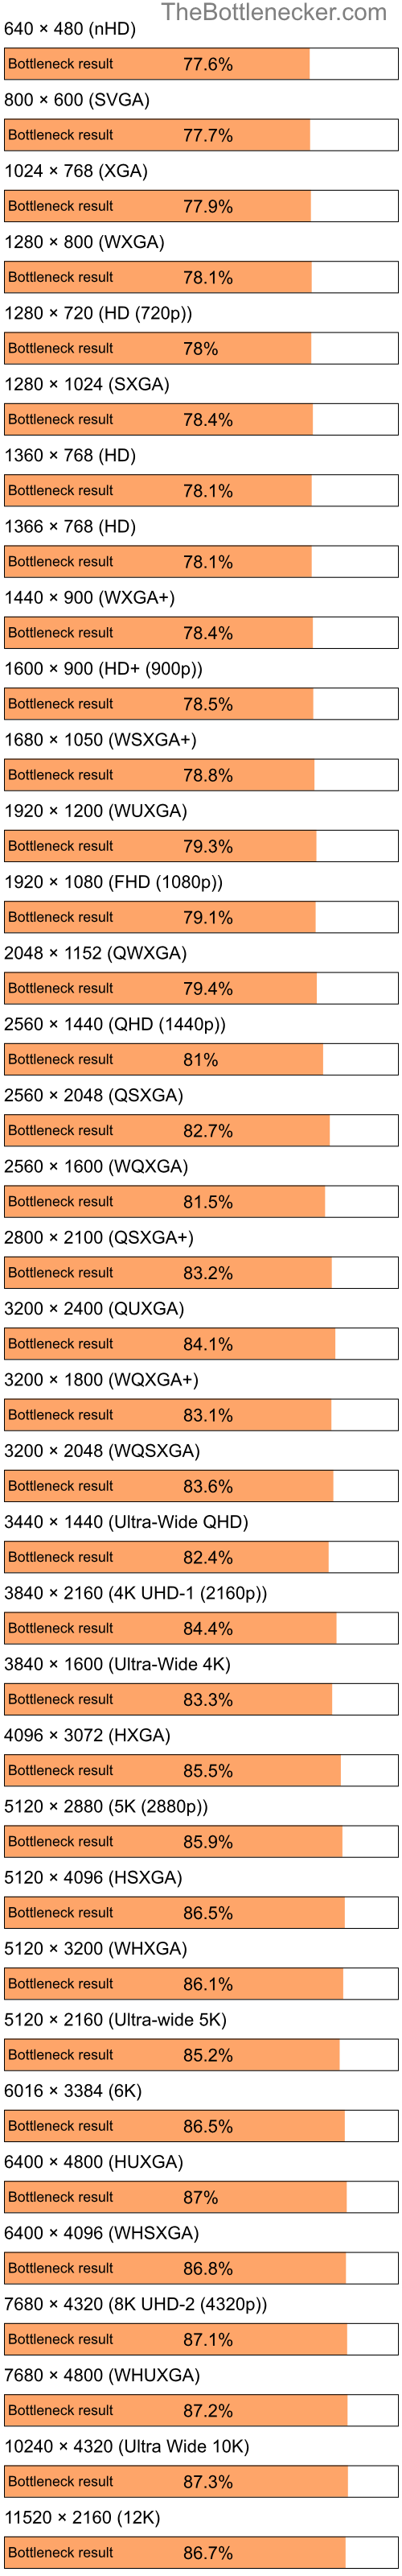 Bottleneck results by resolution for Intel Pentium 4 and NVIDIA GeForce Go 7300 in Graphic Card Intense Tasks